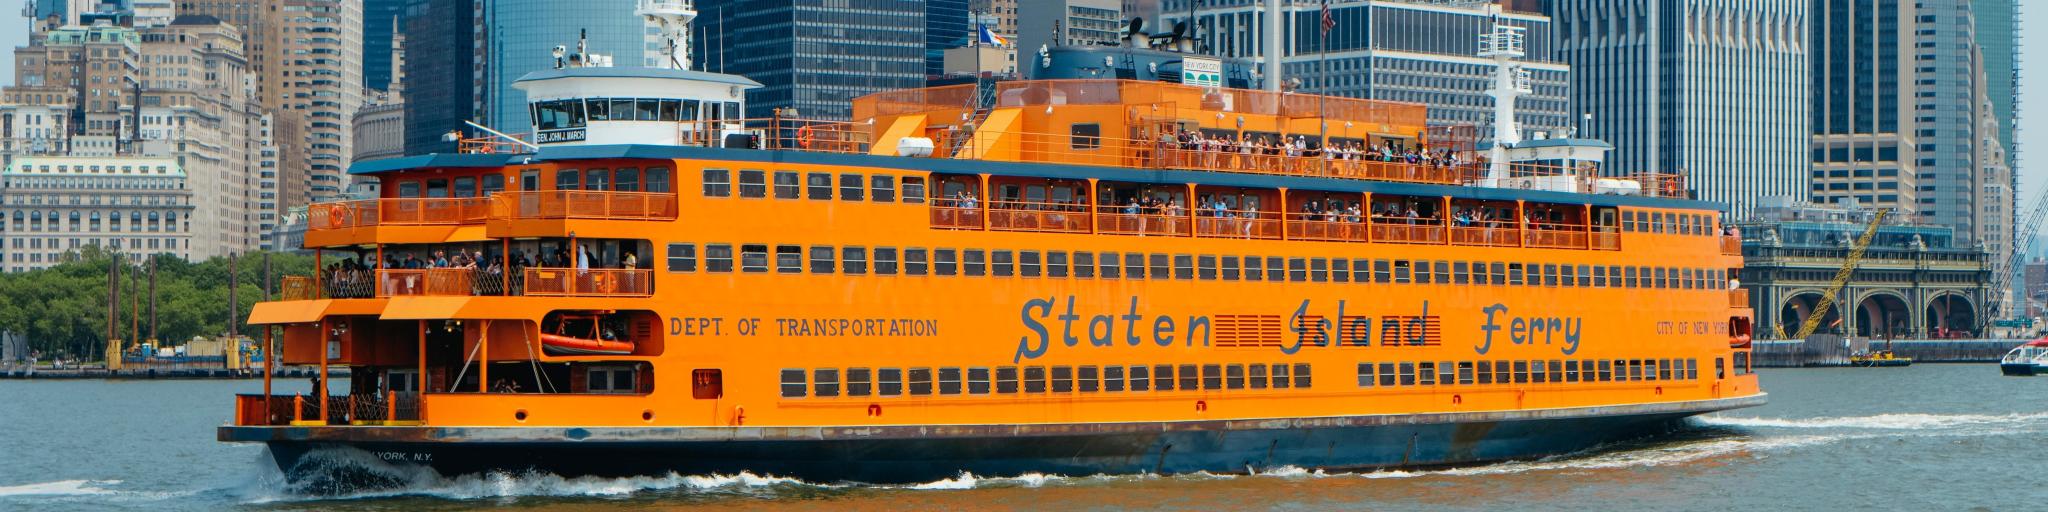 Staten Island Ferry with Manhattan skyscrapers in the background